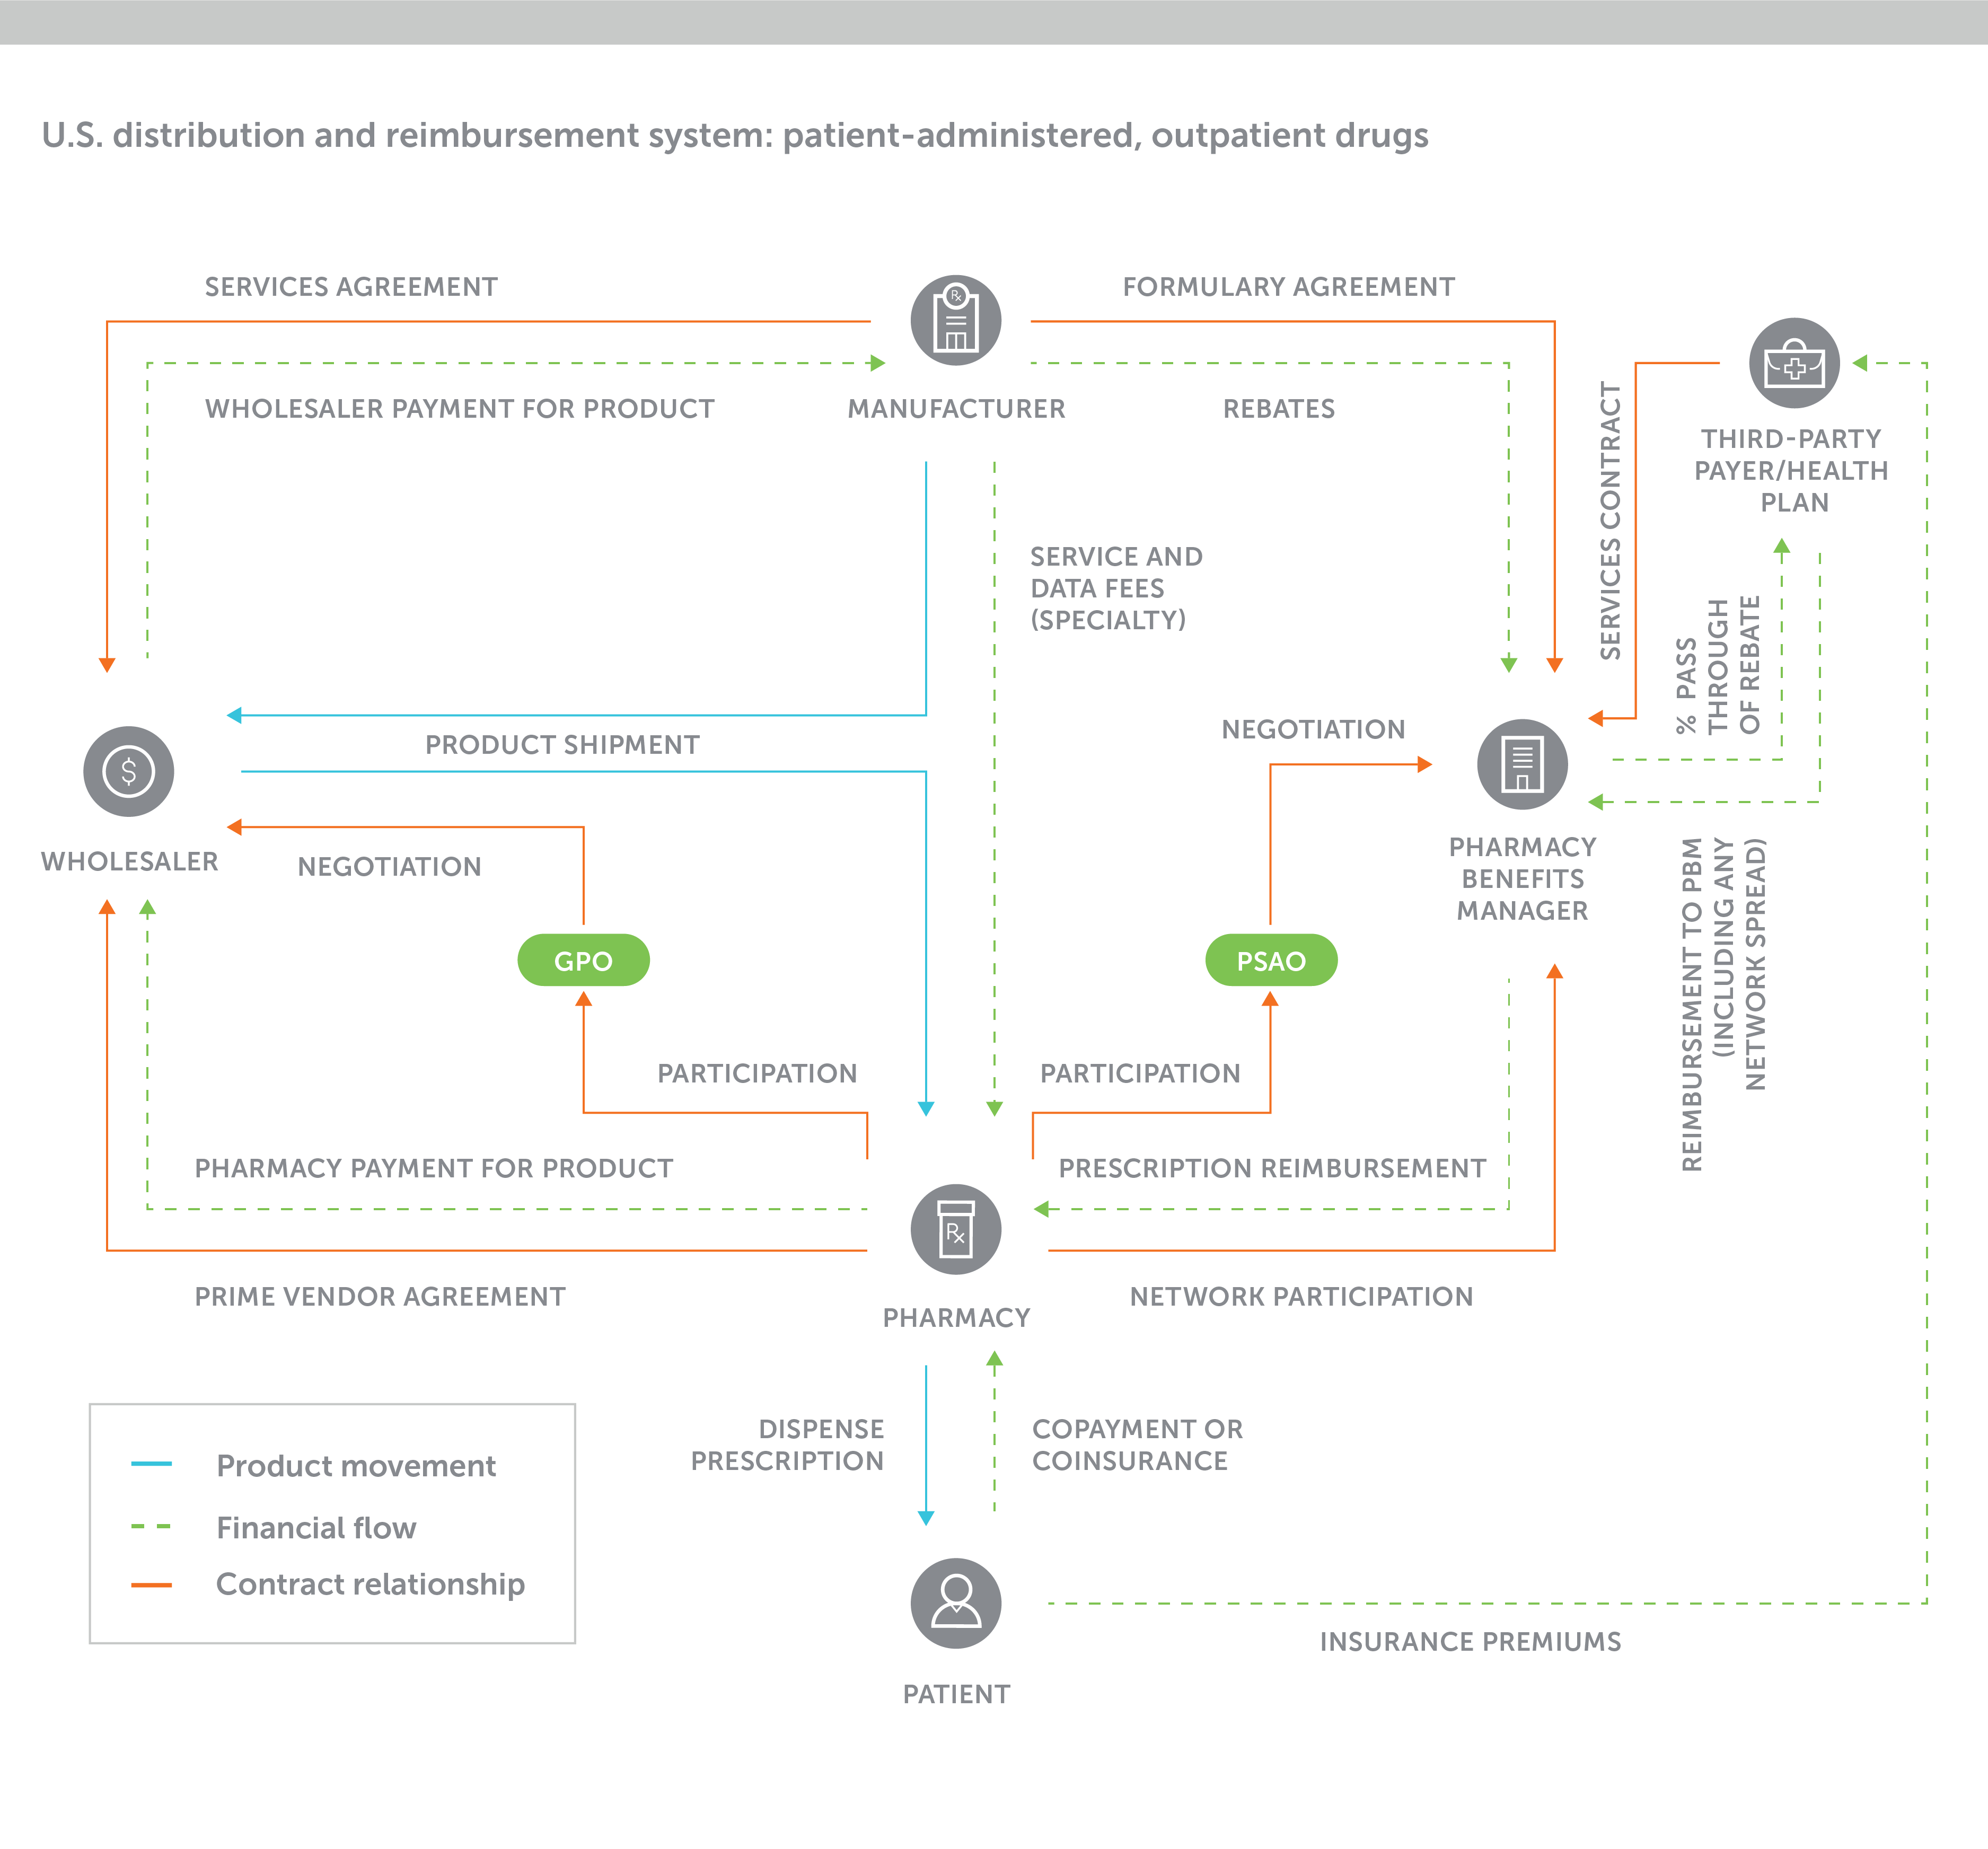 A flowchart that illustrates the complex U.S. distribution and reimbursement system for patient-administered, outpatient drugs.